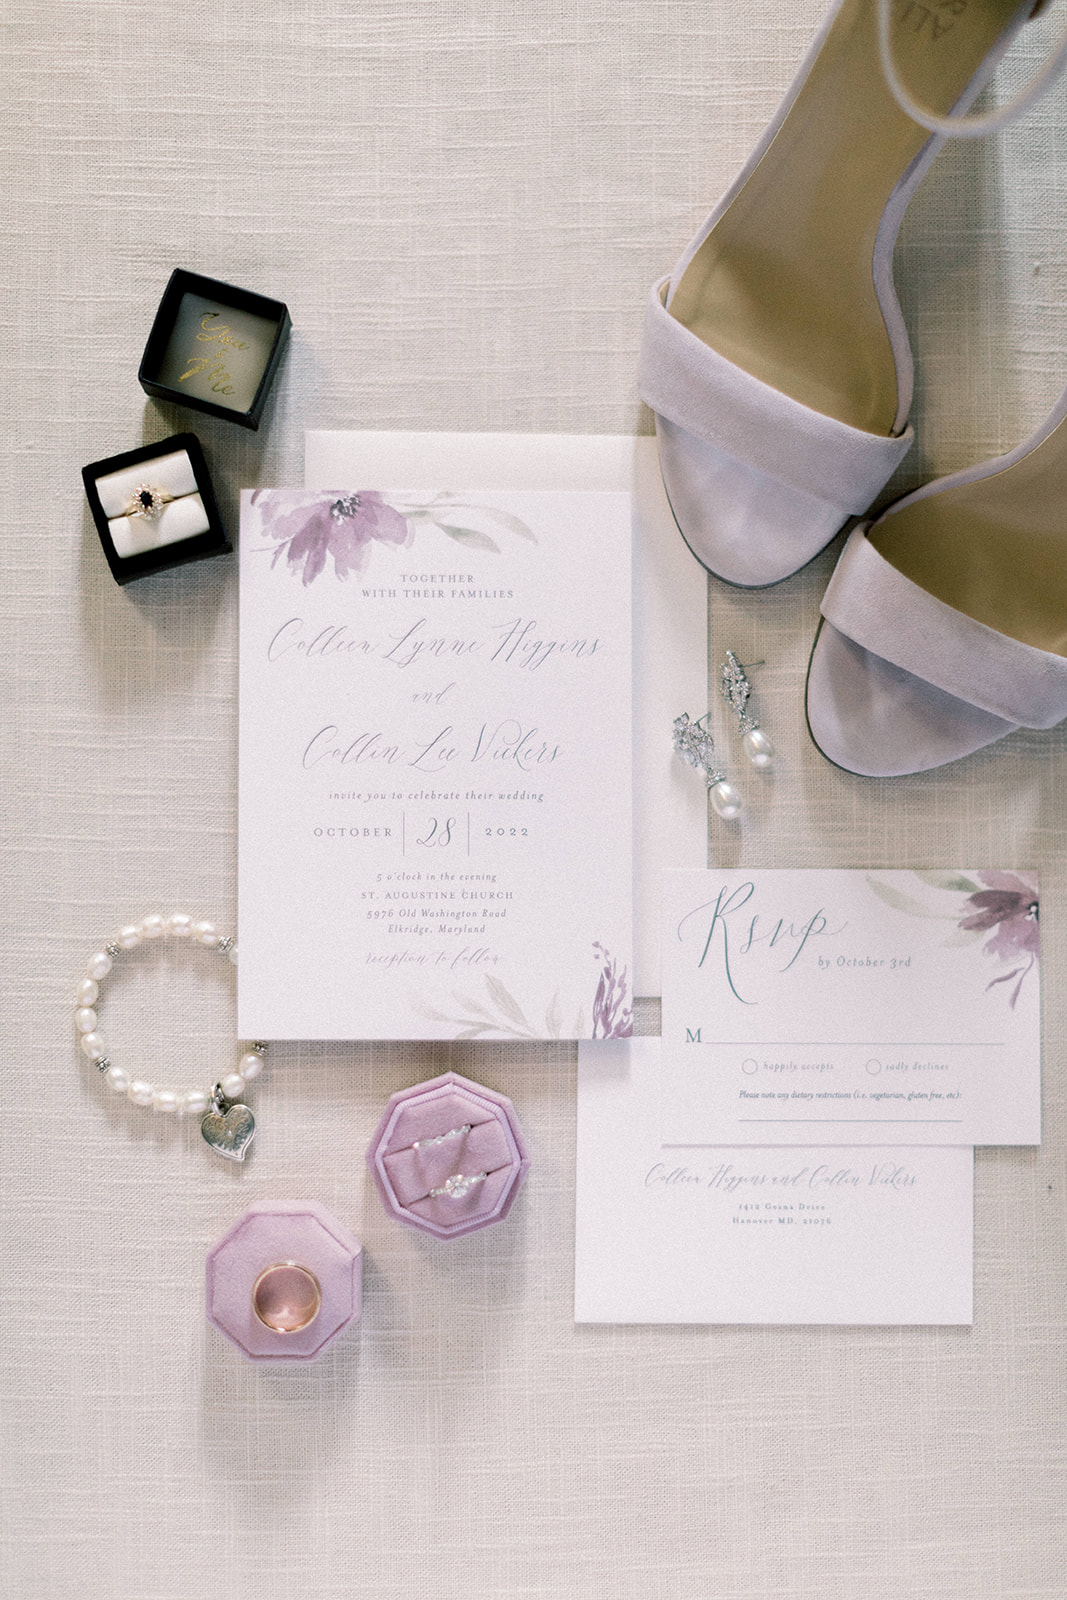 Pennsylvania wedding photographer captures wedding details with invitations and shoes